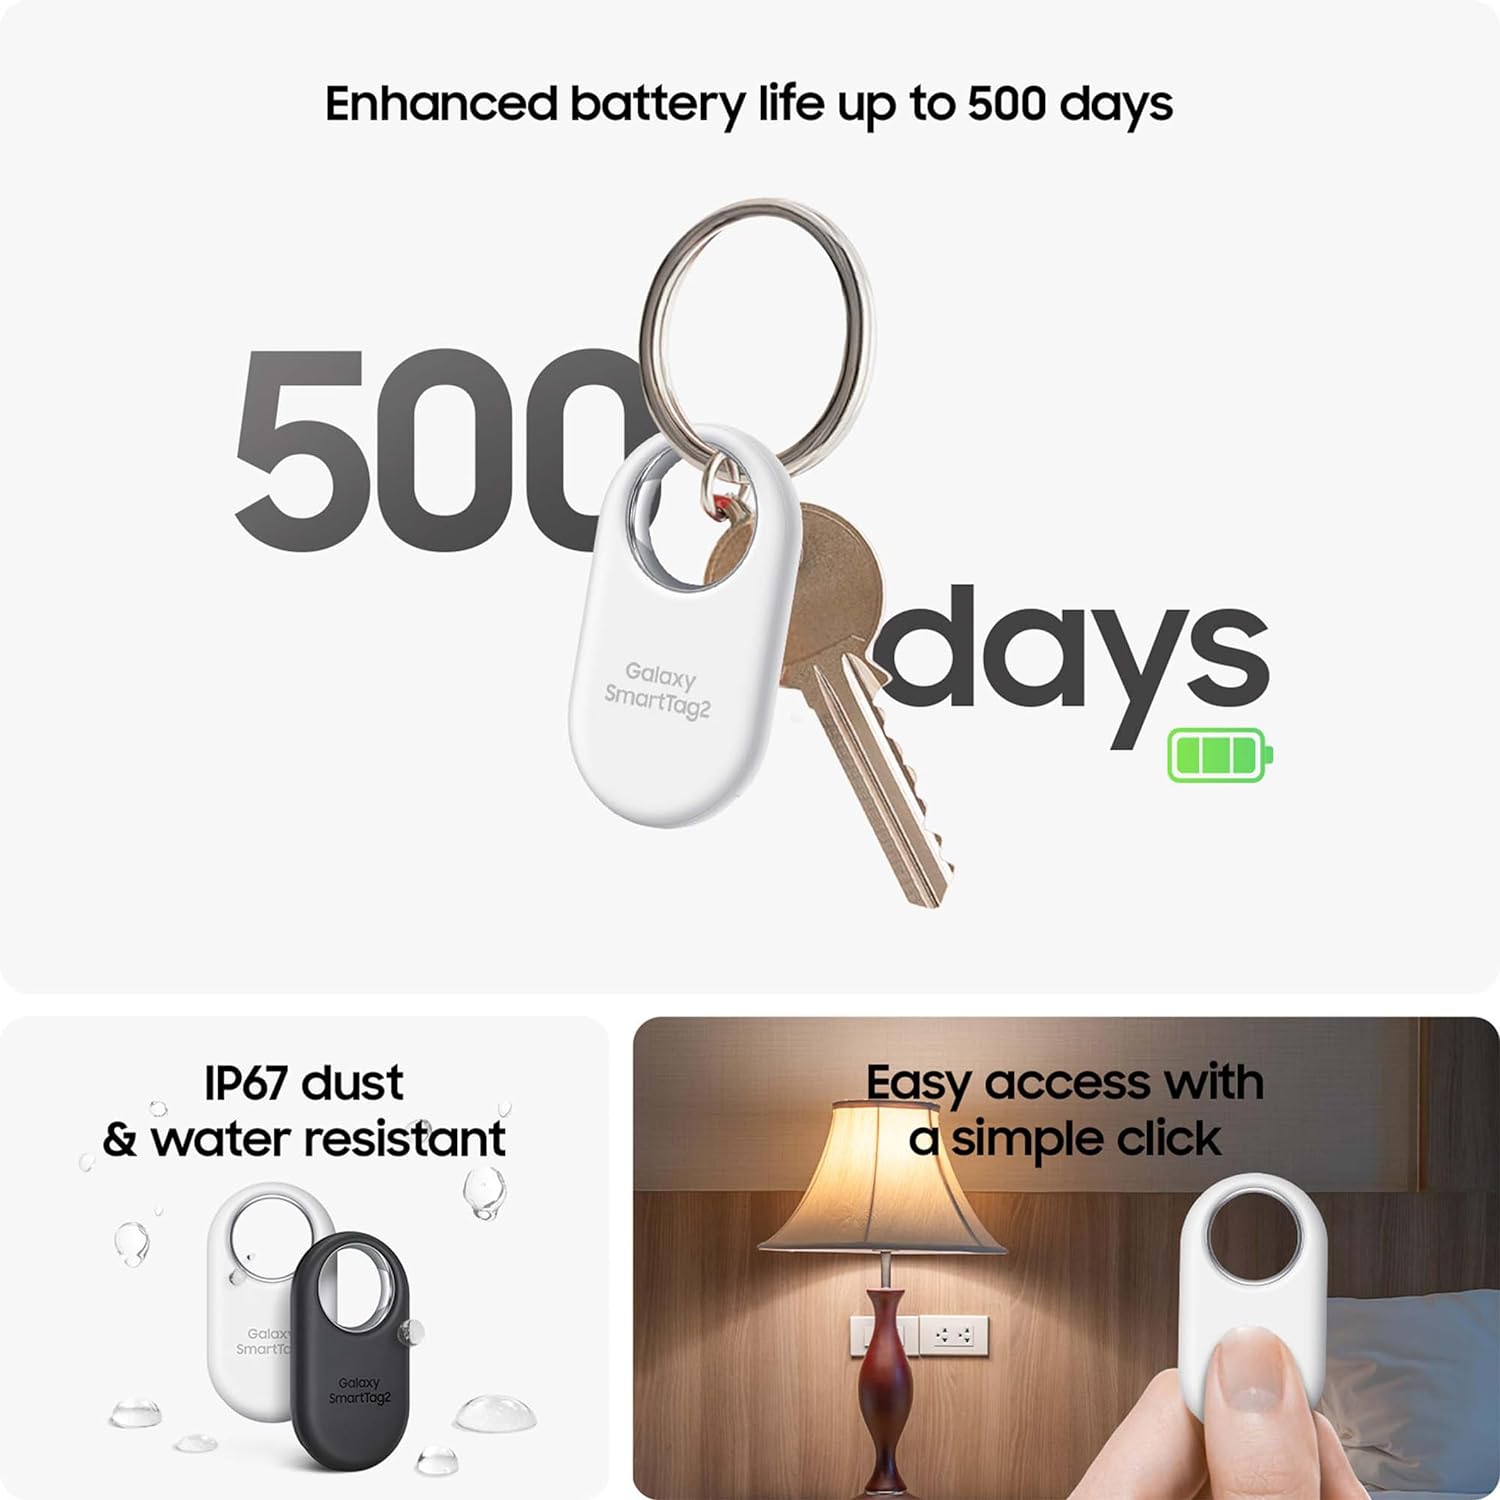 The image is an advertisement for a key-finding device known as the Galaxy SmartTag2. The top part of the image features a key ring with a white Galaxy SmartTag attached to it, highlighting the product's enhanced battery life of up to 500 days. Below that, there are three smaller images highlighting additional features of the SmartTag:

1. The bottom left image indicates that the product is IP67 dust and water-resistant, showcasing two SmartTags with water droplets around them to demonstrate their resistance to water and dust.

2. The middle image at the bottom looks to show a living room setting with a lamp, indicating the ease of use or potential use case for turning on a light with a simple click of the SmartTag.

3. And the bottom right image depicts a person holding a SmartTag and pressing a button on it, suggesting the simplicity of the device and how it can be operated with a single click.